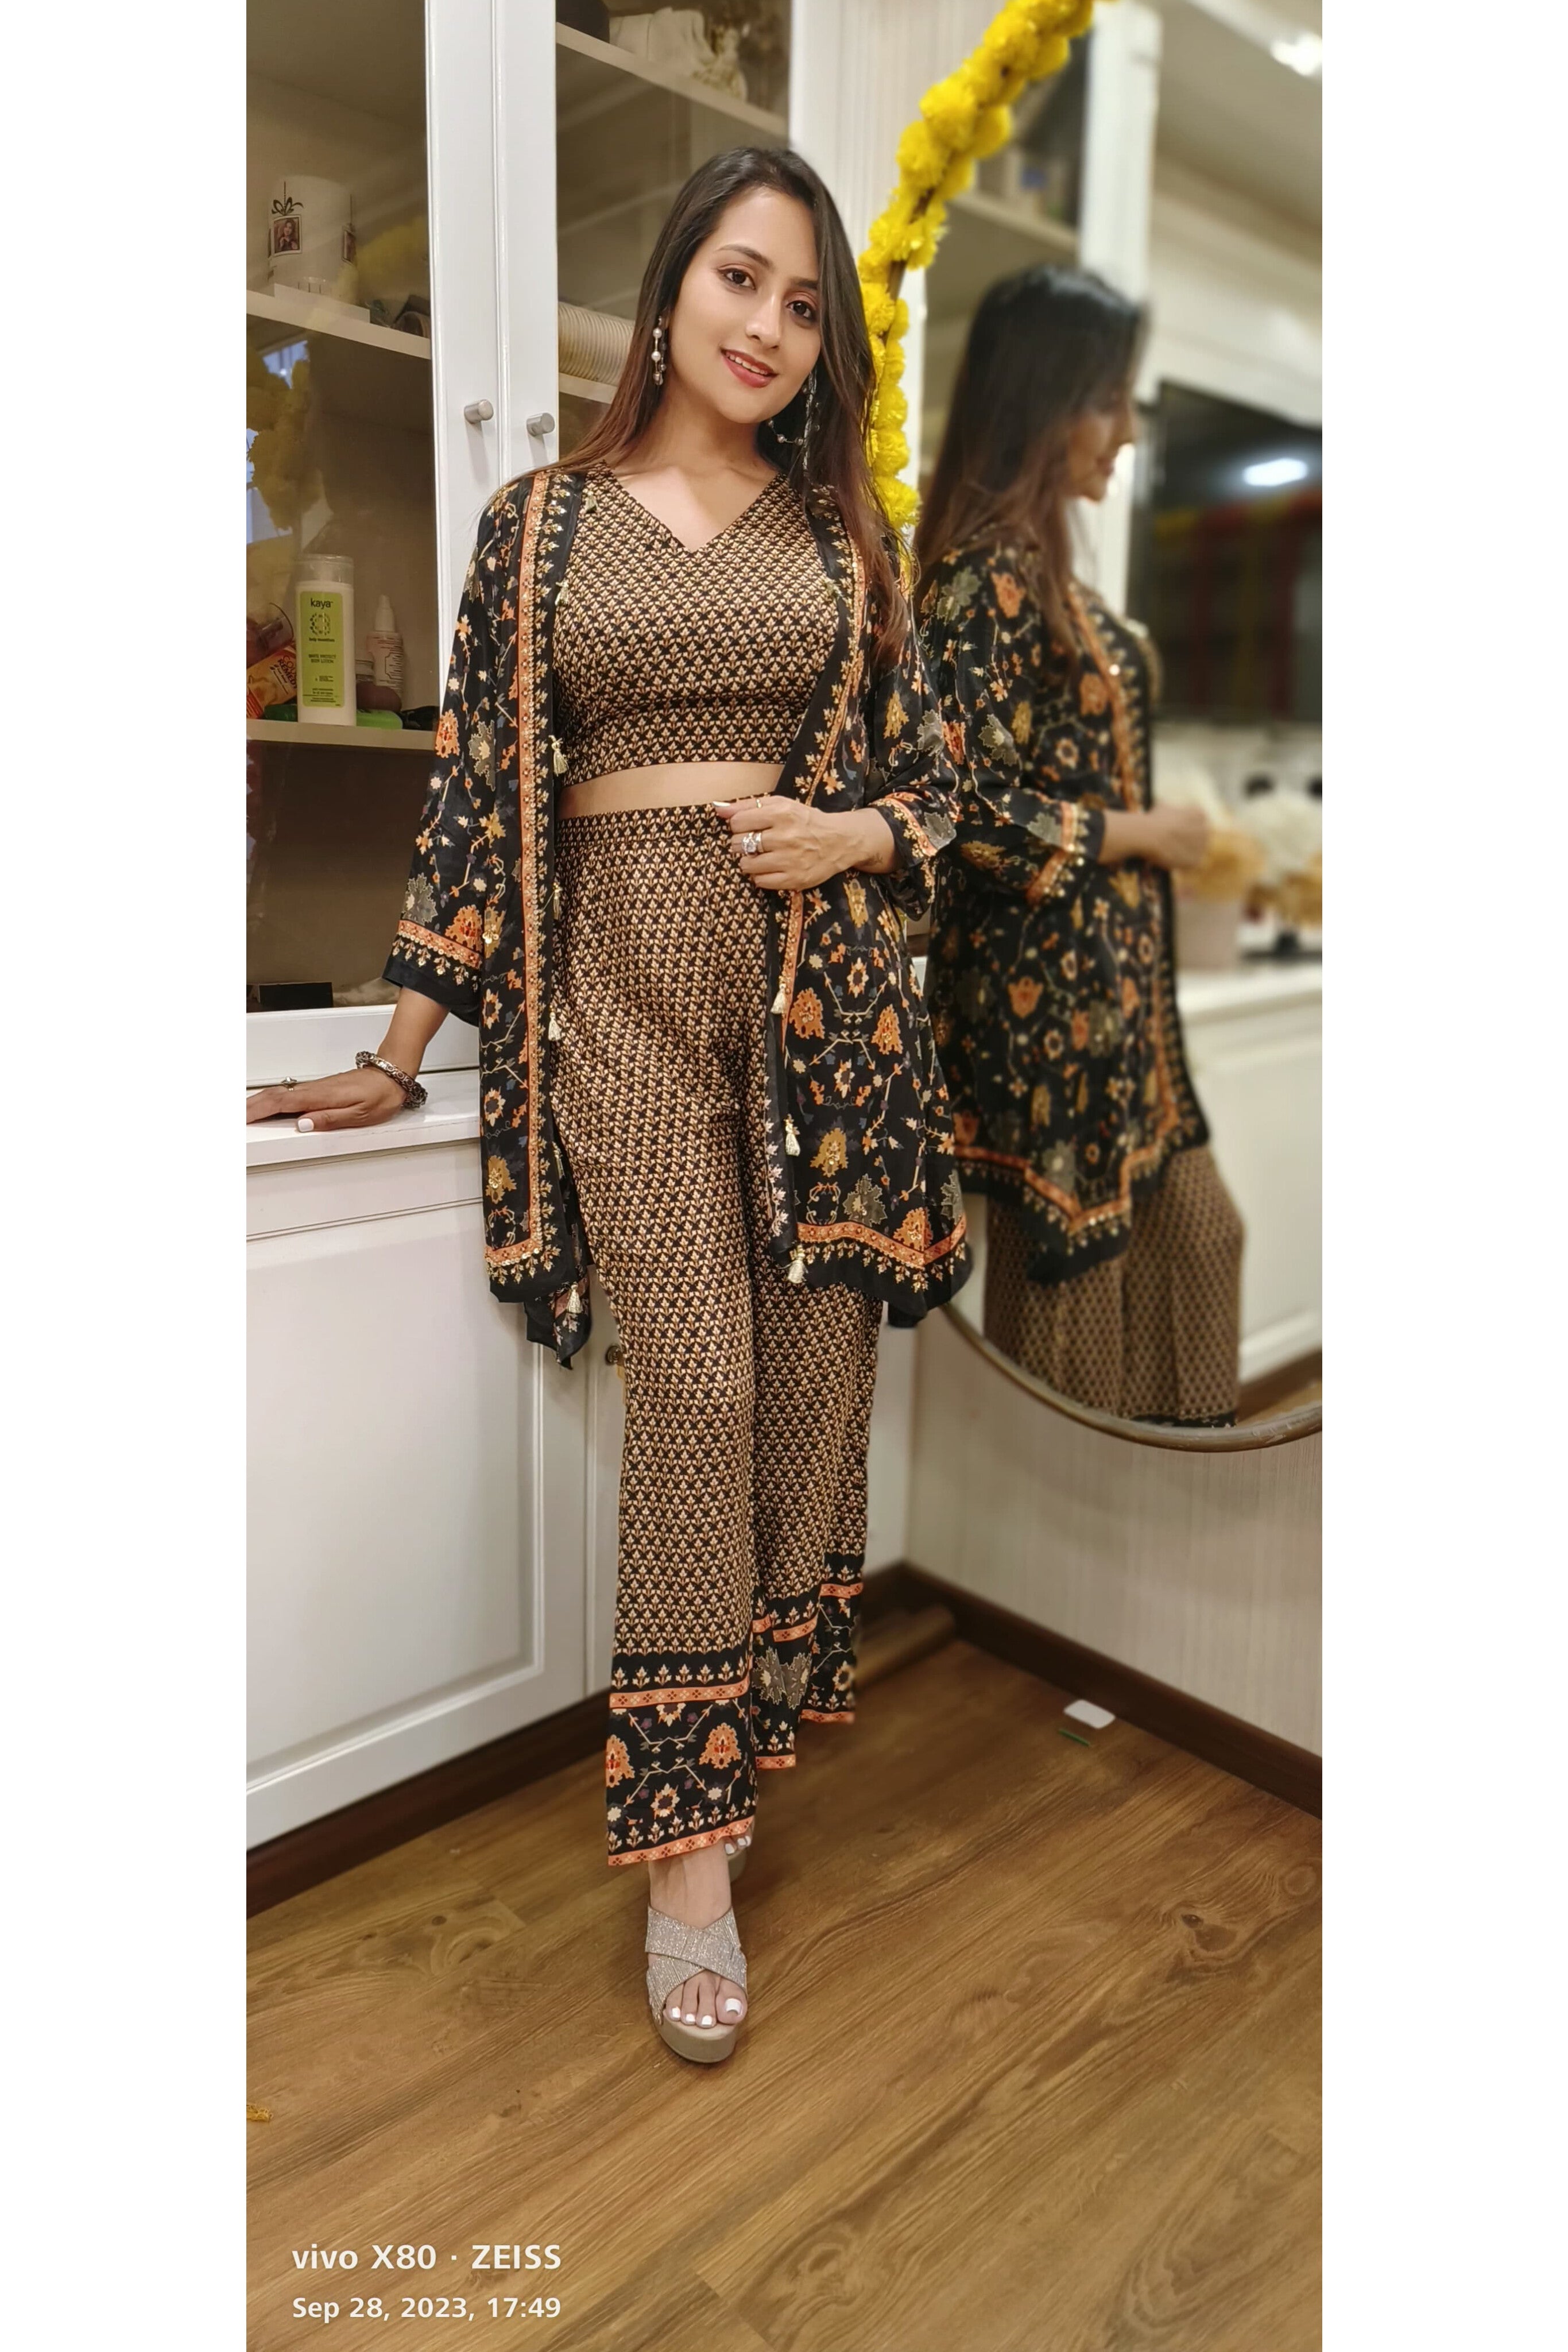 CREAM BEIGE BUTI WORK TIERED LONG KURTA TOP WITH HIGH SIDE SLITS AND  WRINKLE WIDE LEG PALAZZO PANTS PAIRED WITH A MATCHING DUPATTA AND GOLD  DETAILS. - Seasons India